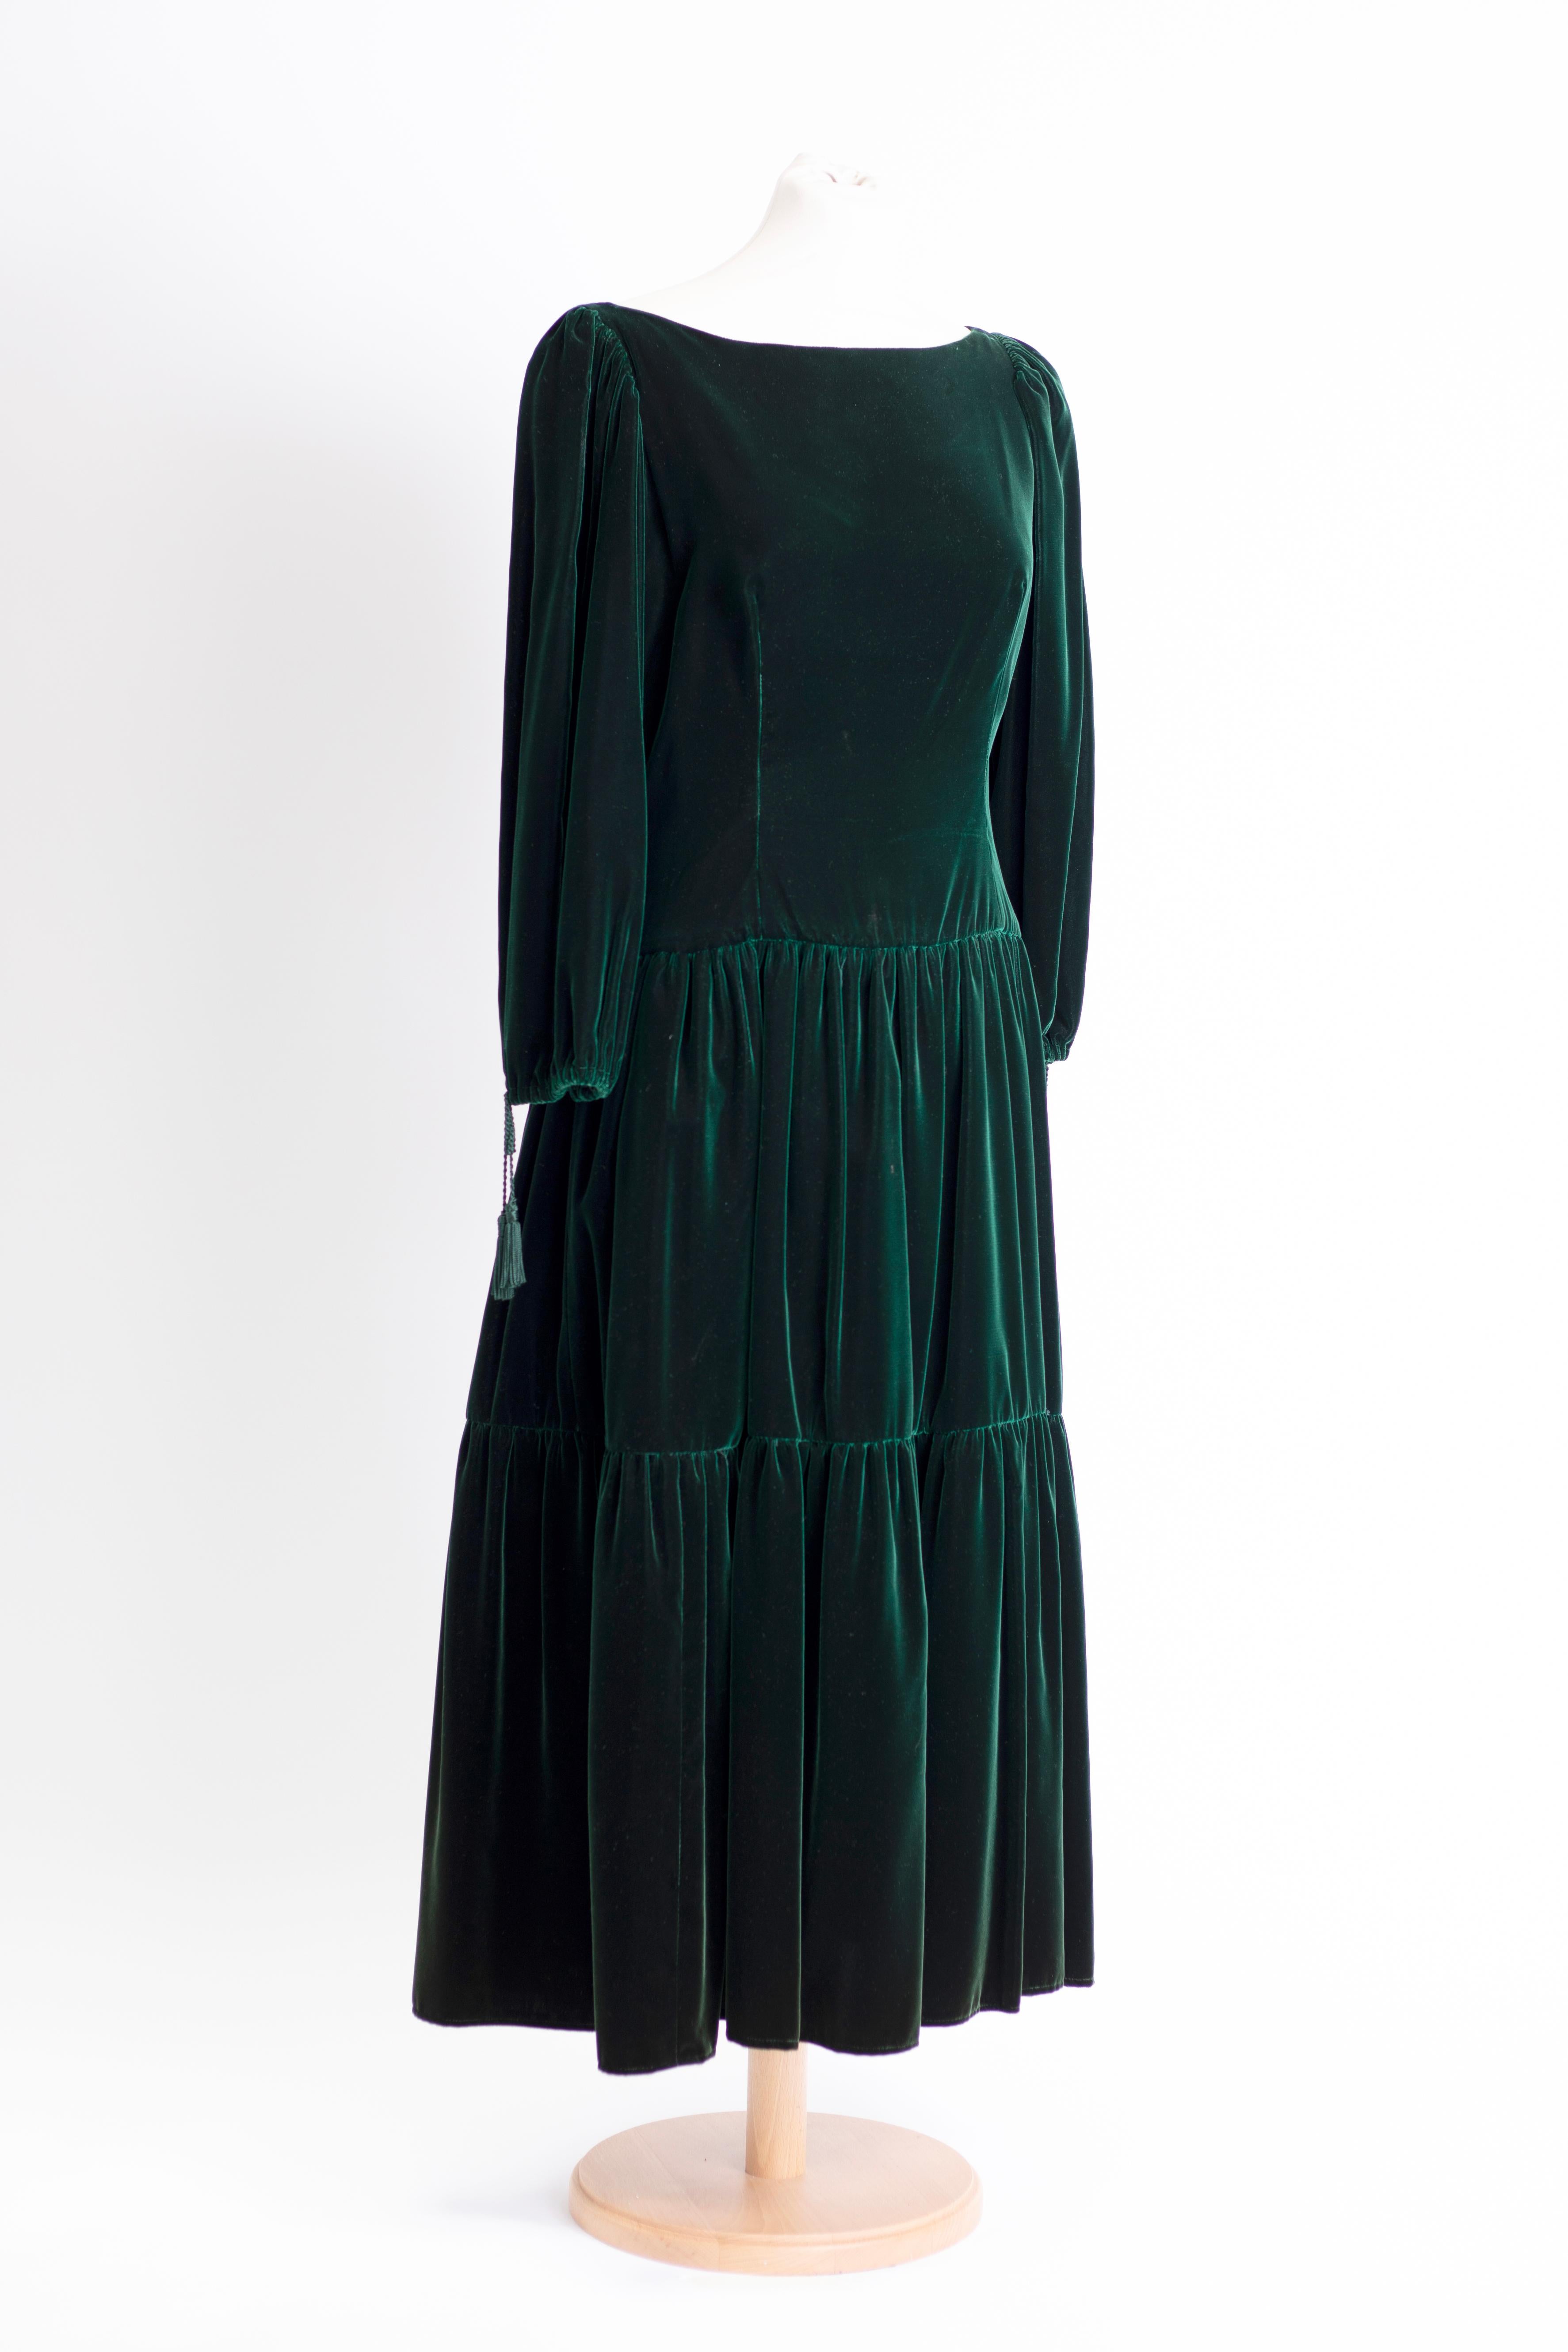 Beautiful midi length velvet ruffled dress with 3/4 puff sleeves and woven tassels. with boat neckline.

Óscar Arístides Renta Fiallo (22 July 1932 – 20 October 2014), known professionally as Oscar de la Renta, was a Dominican fashion designer. Born